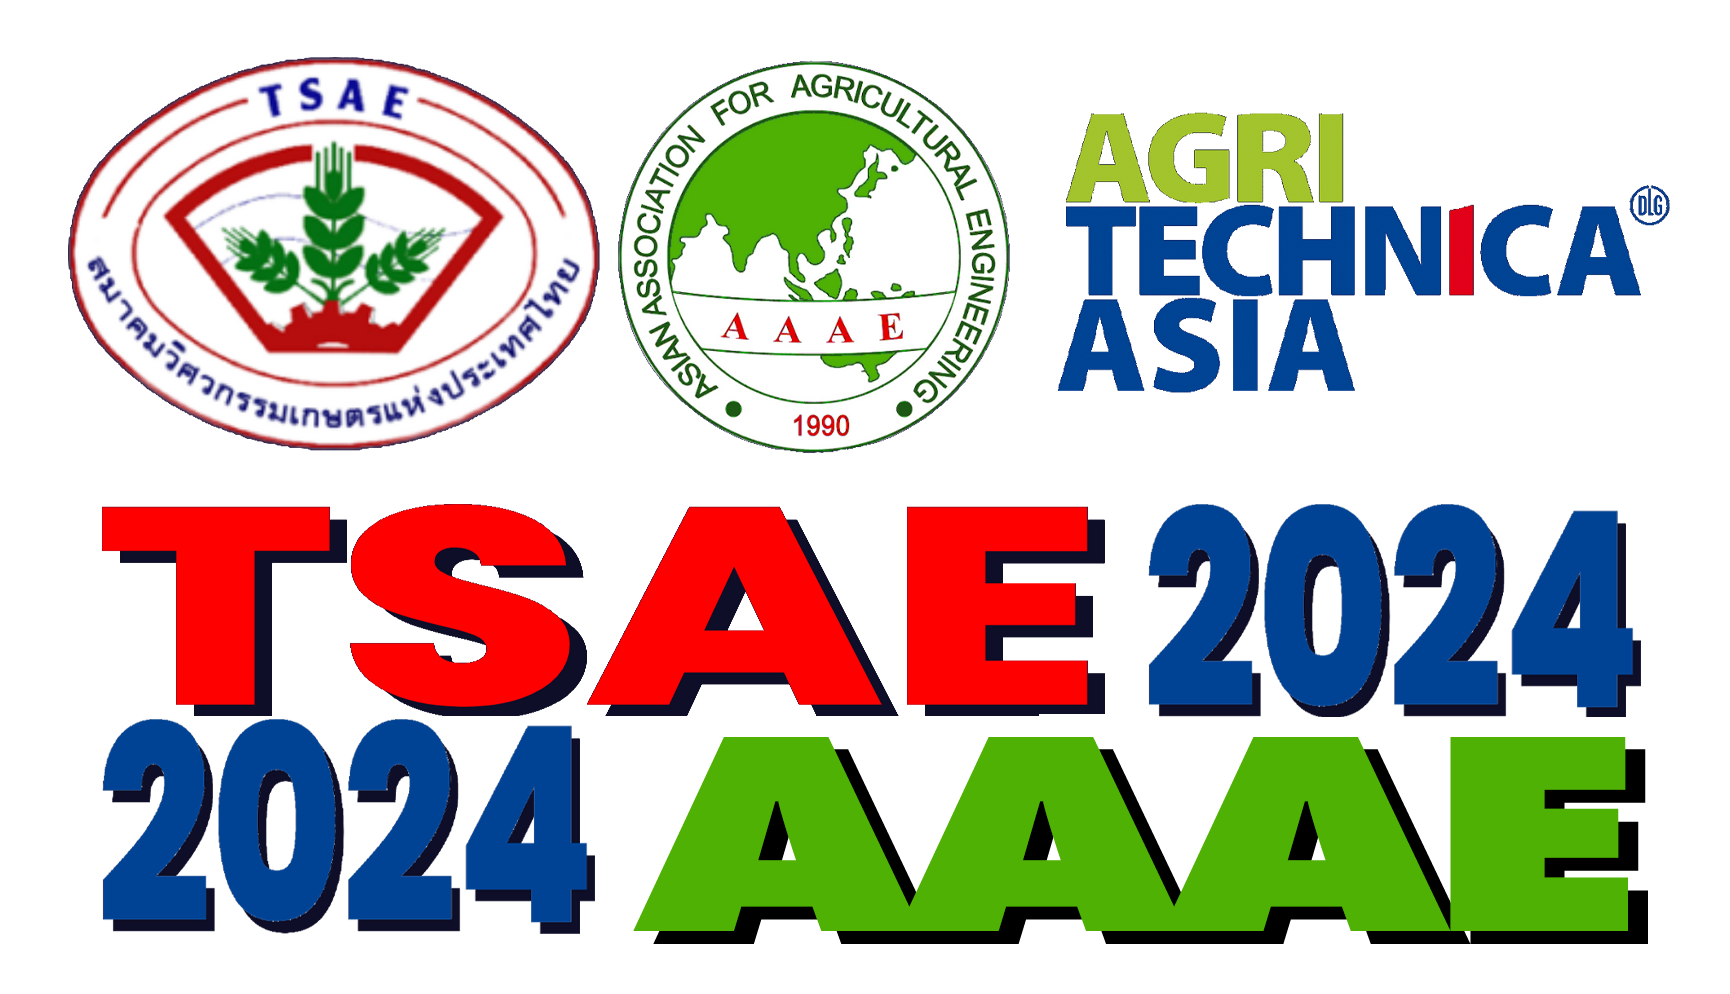 The 17th TSAE International Conference & The 25th TSAE National Conference, 2024 AAAE Conference - The 2024 AAAE International Agricultural Engineering Conference